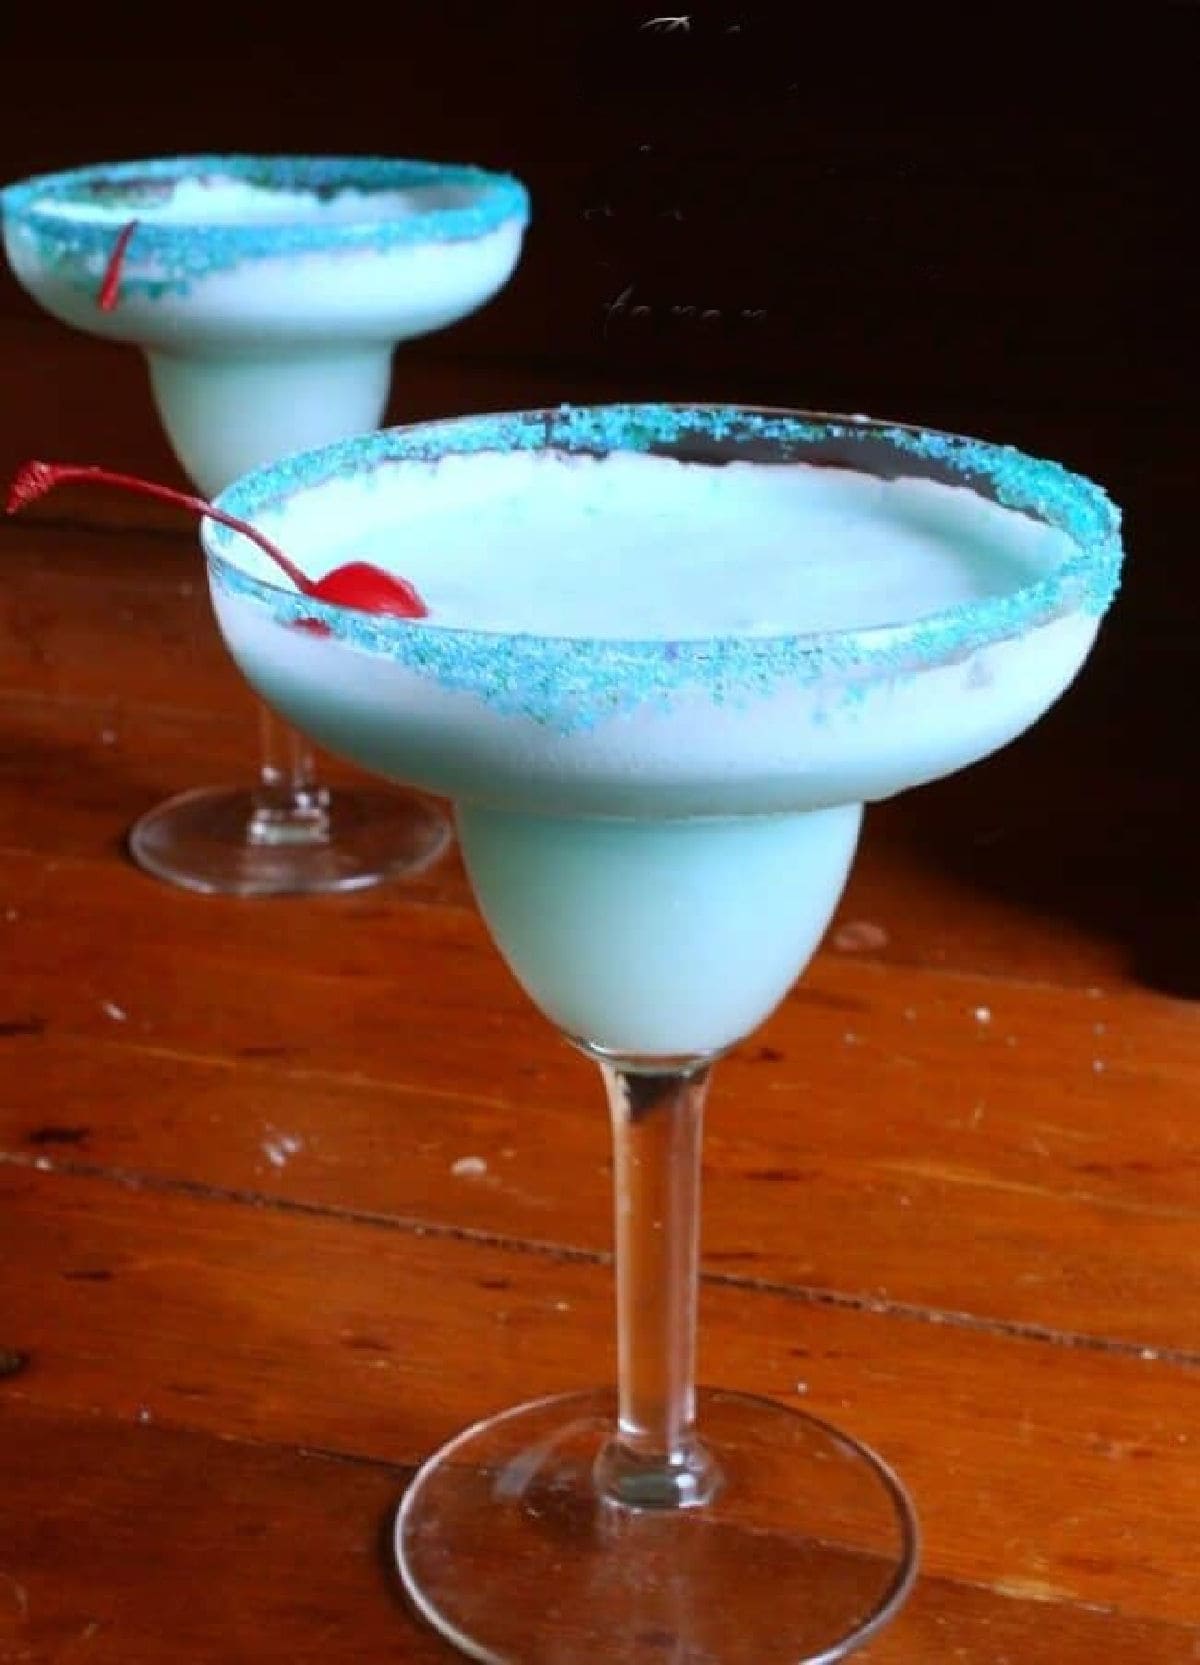 Two stemmed glasses with this light blue cocktail inside.